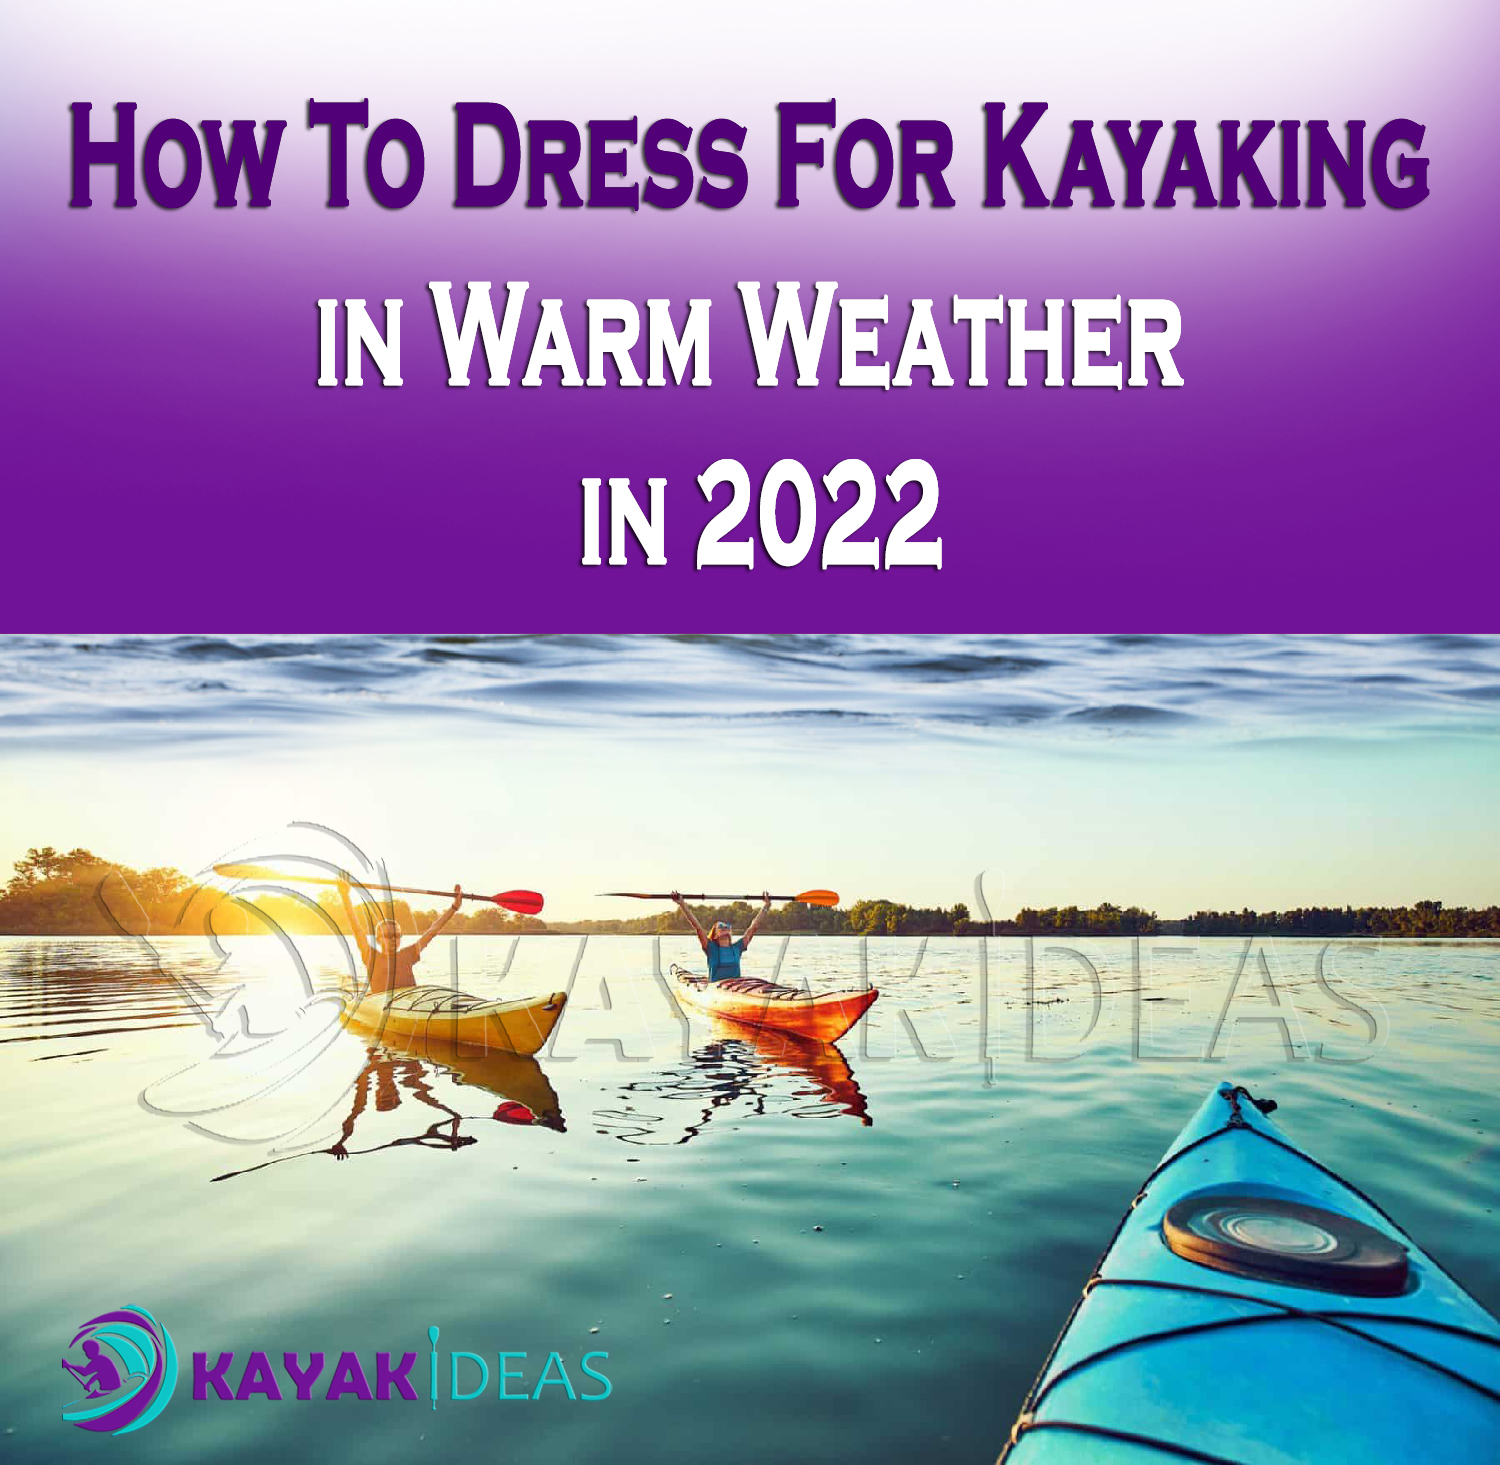 Things To Wear For Kayaking in Warm Weather